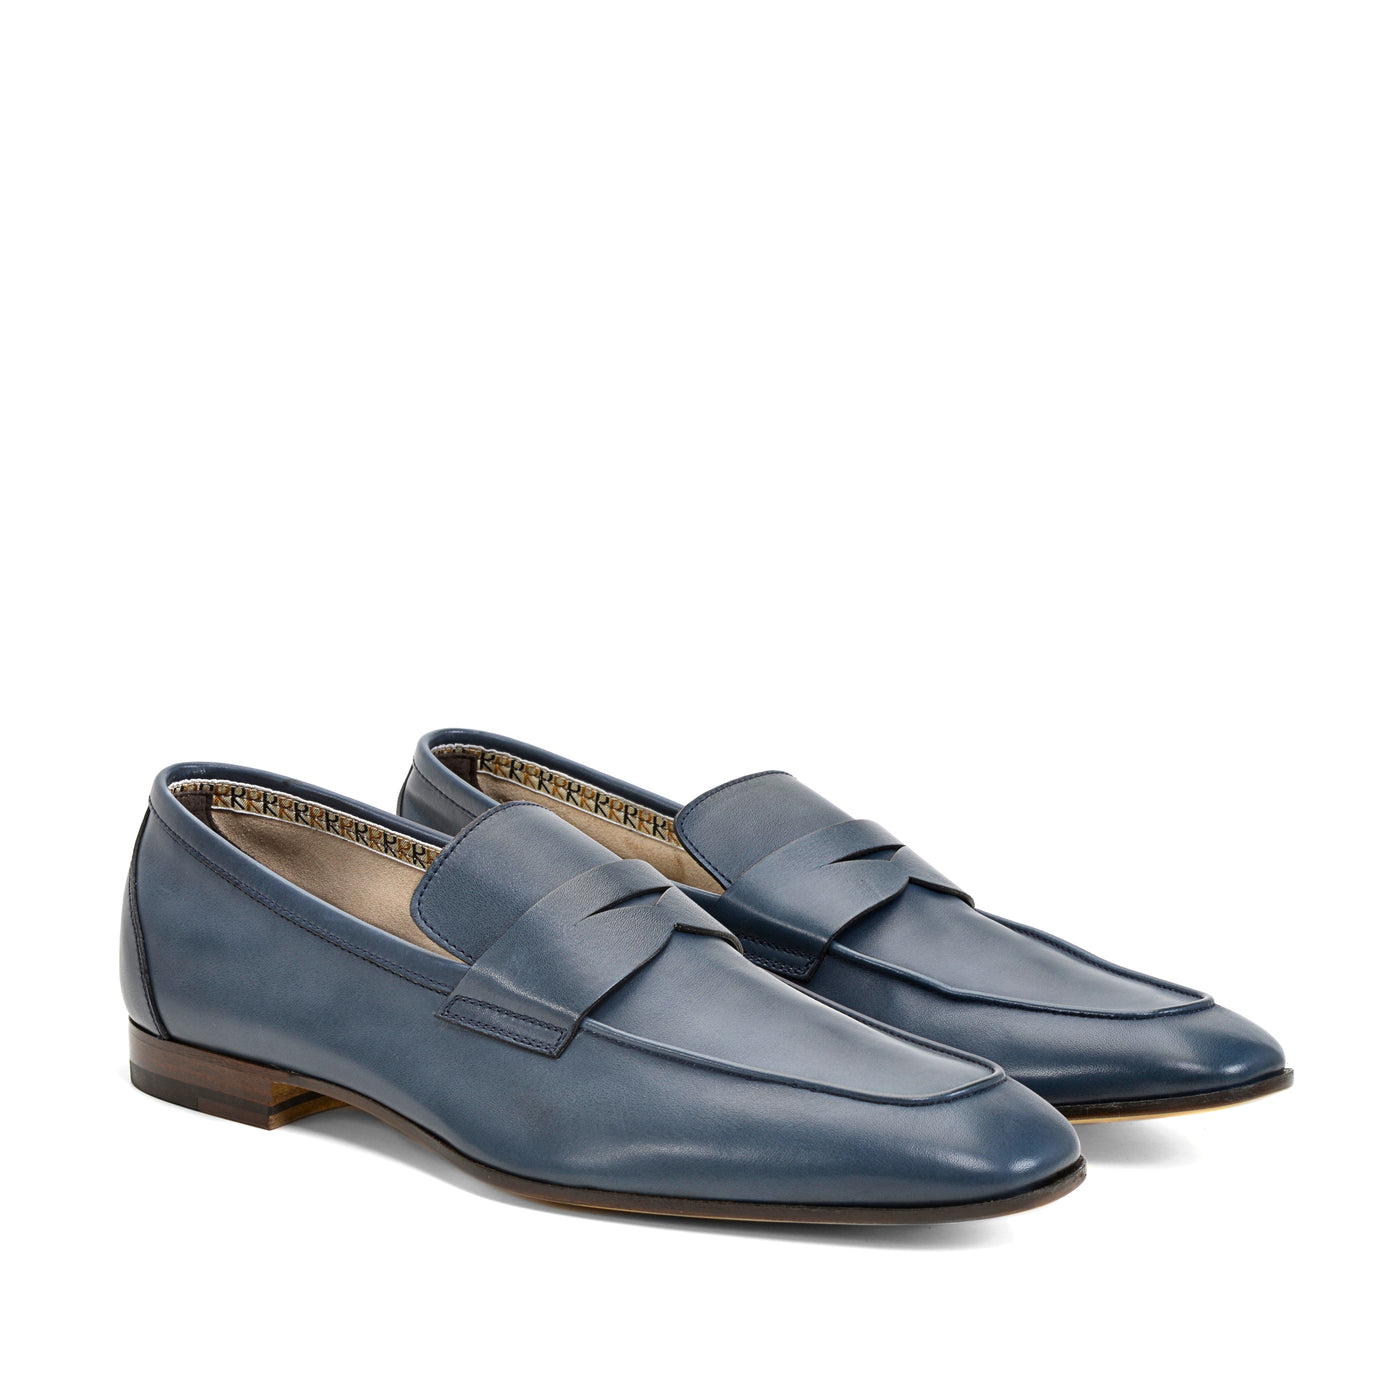 Shop The Latest Collection Of Fratelli Rossetti Light Leather Loafer 51883 In Lebanon